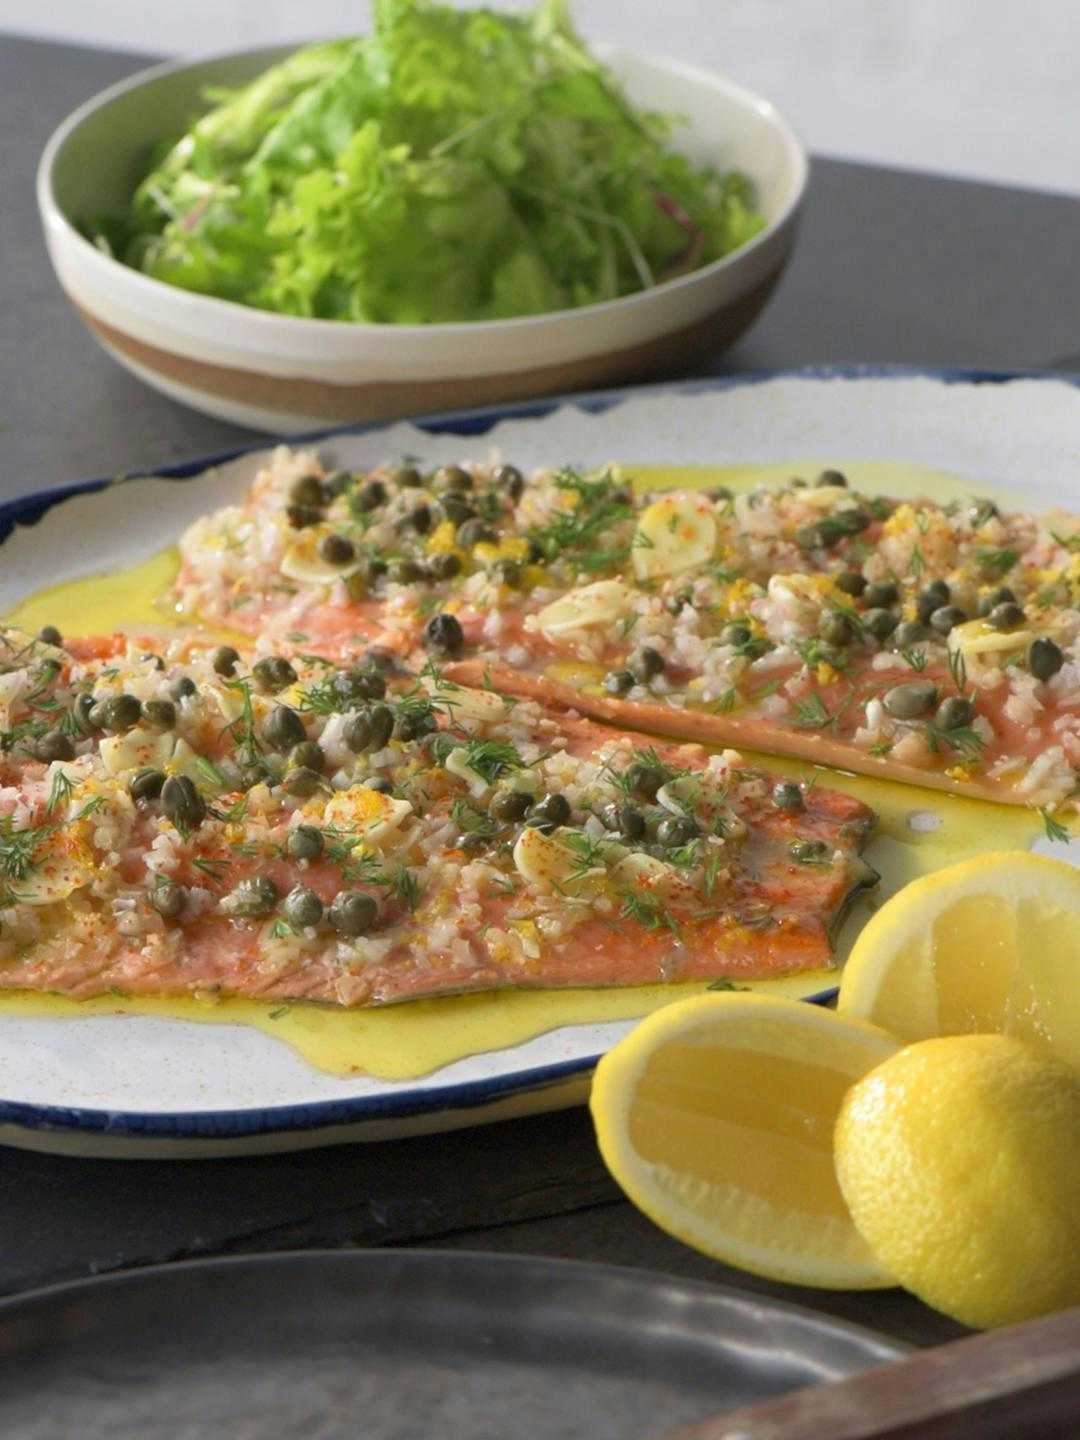 Baked Trout with Lemon, Capers and Dill